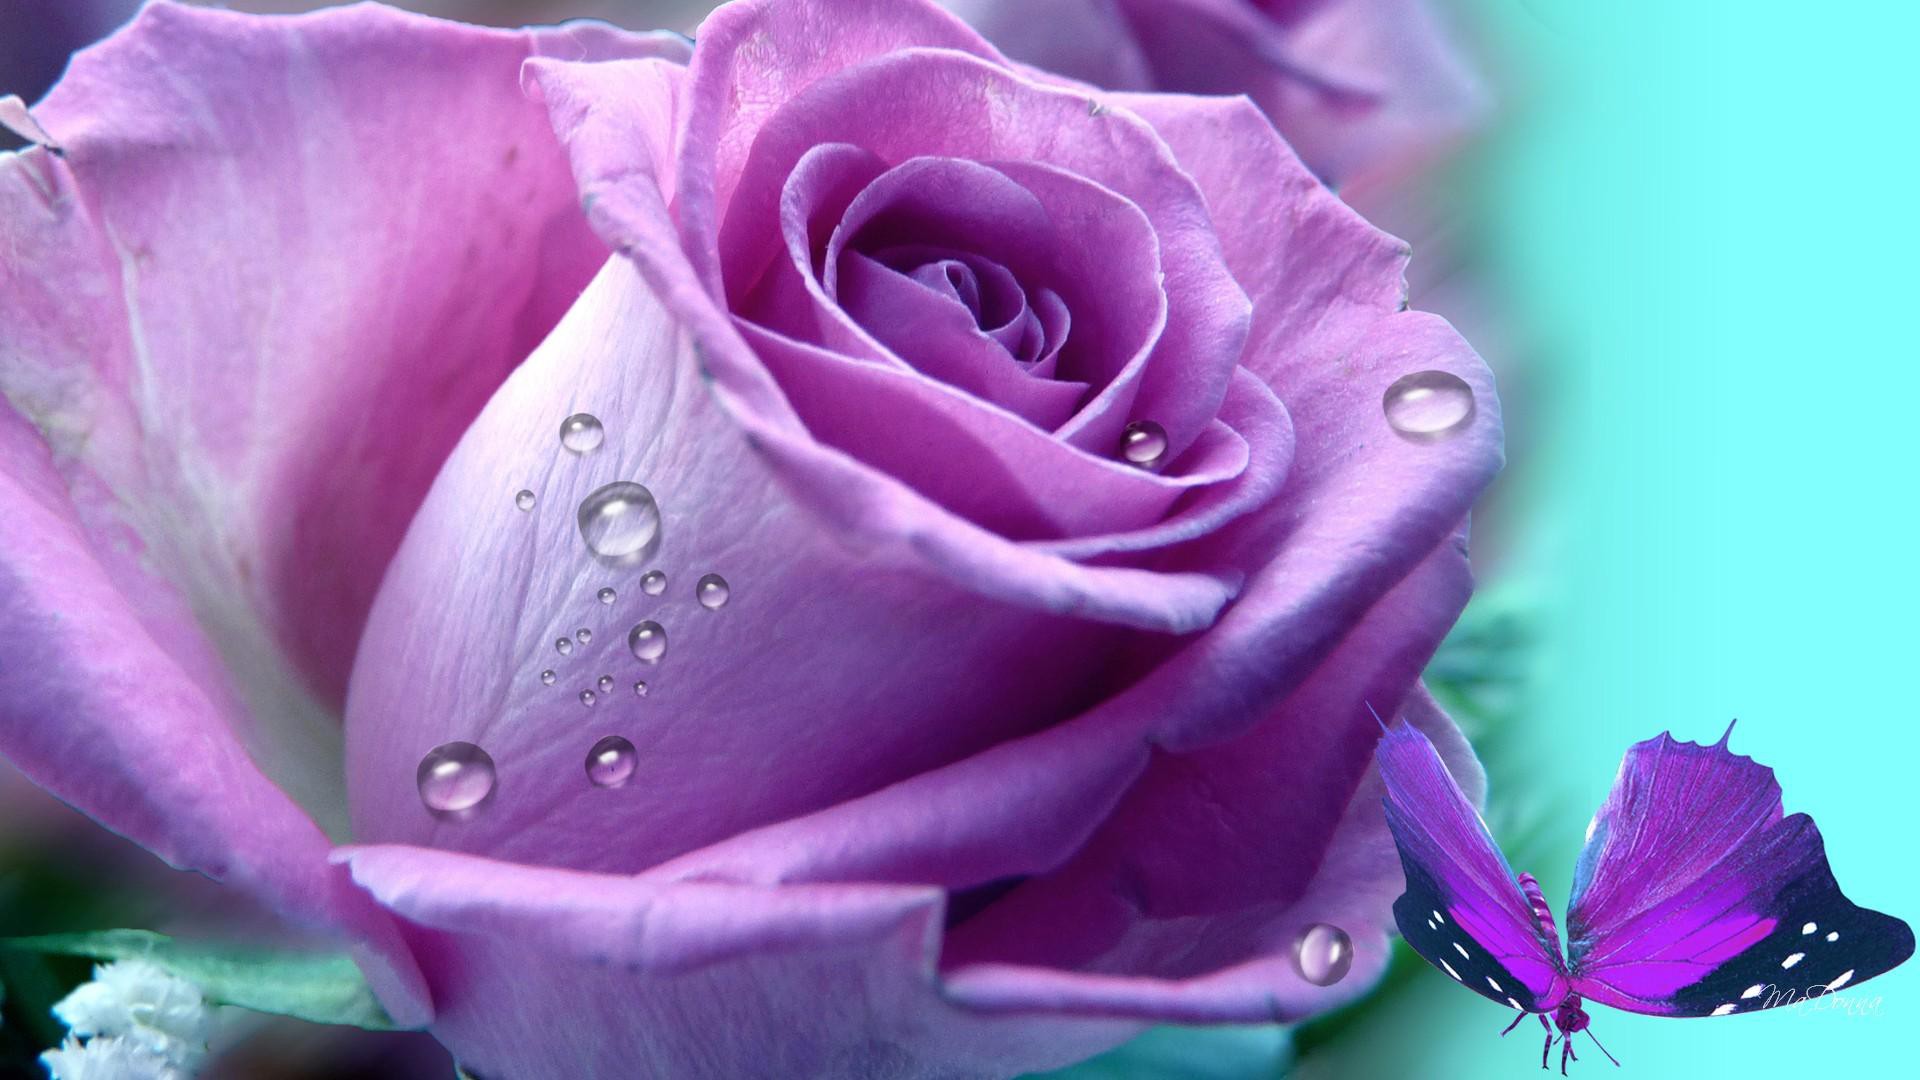 Lilac Rose Puprle Free Awesome Image For Mobile